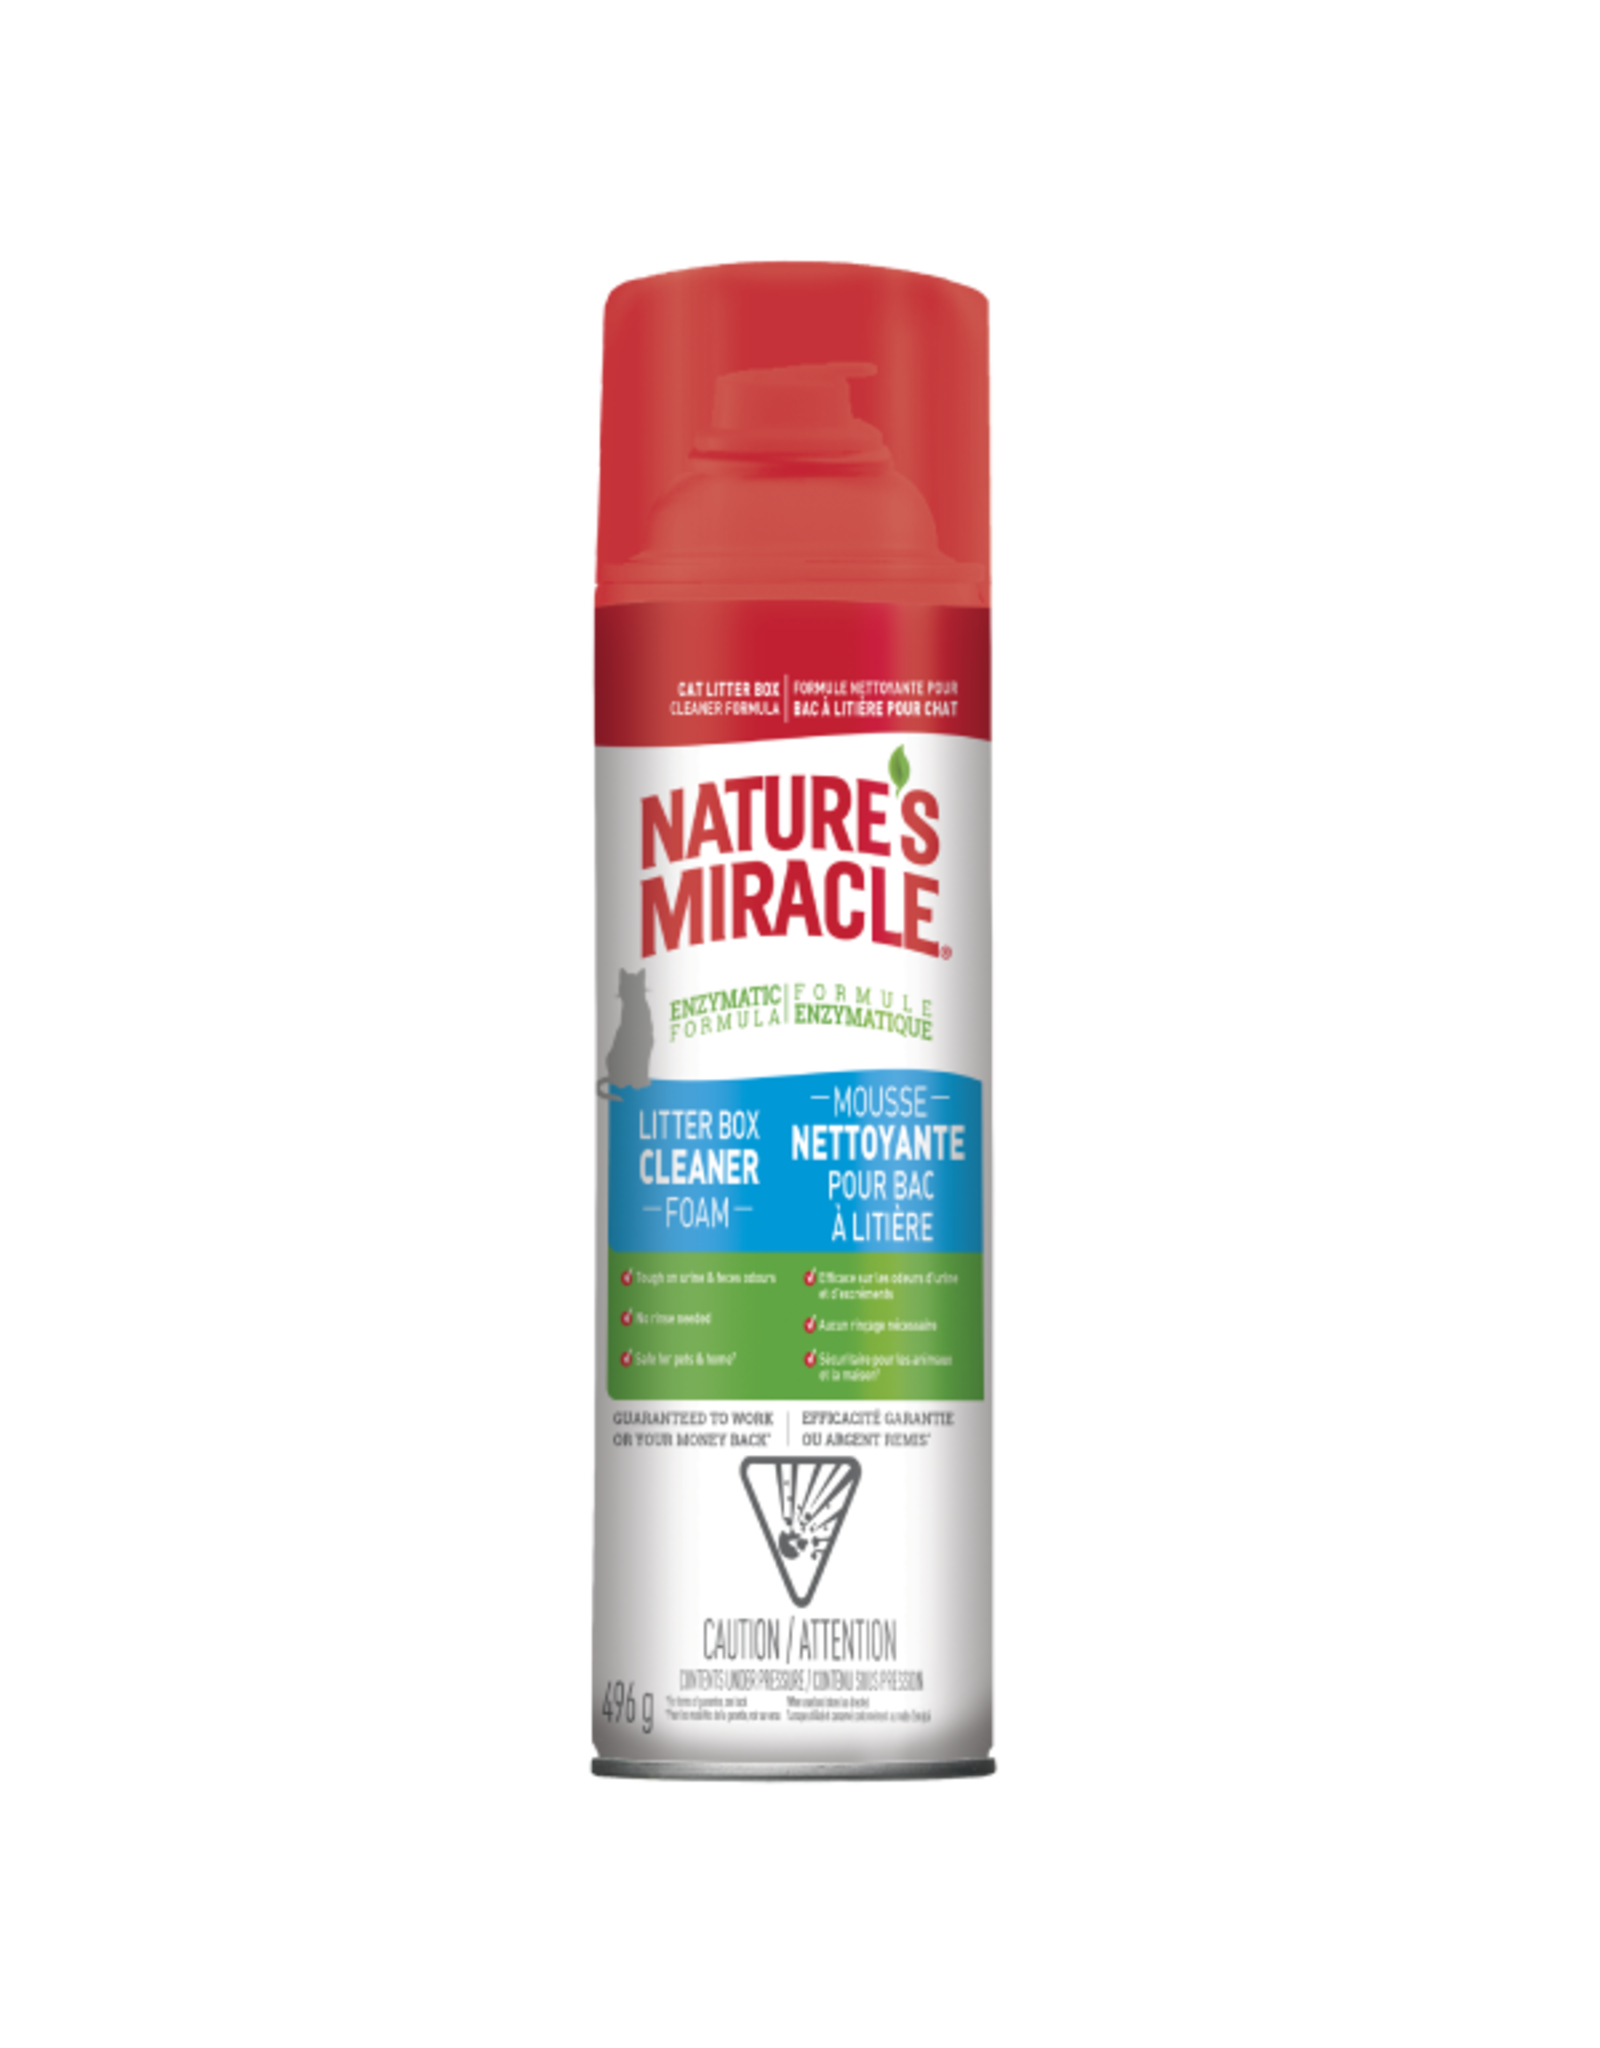 Nature's Miracle Nature's Miracle Litter Box Cleaner Foam Aerosol 17.5OZ*~